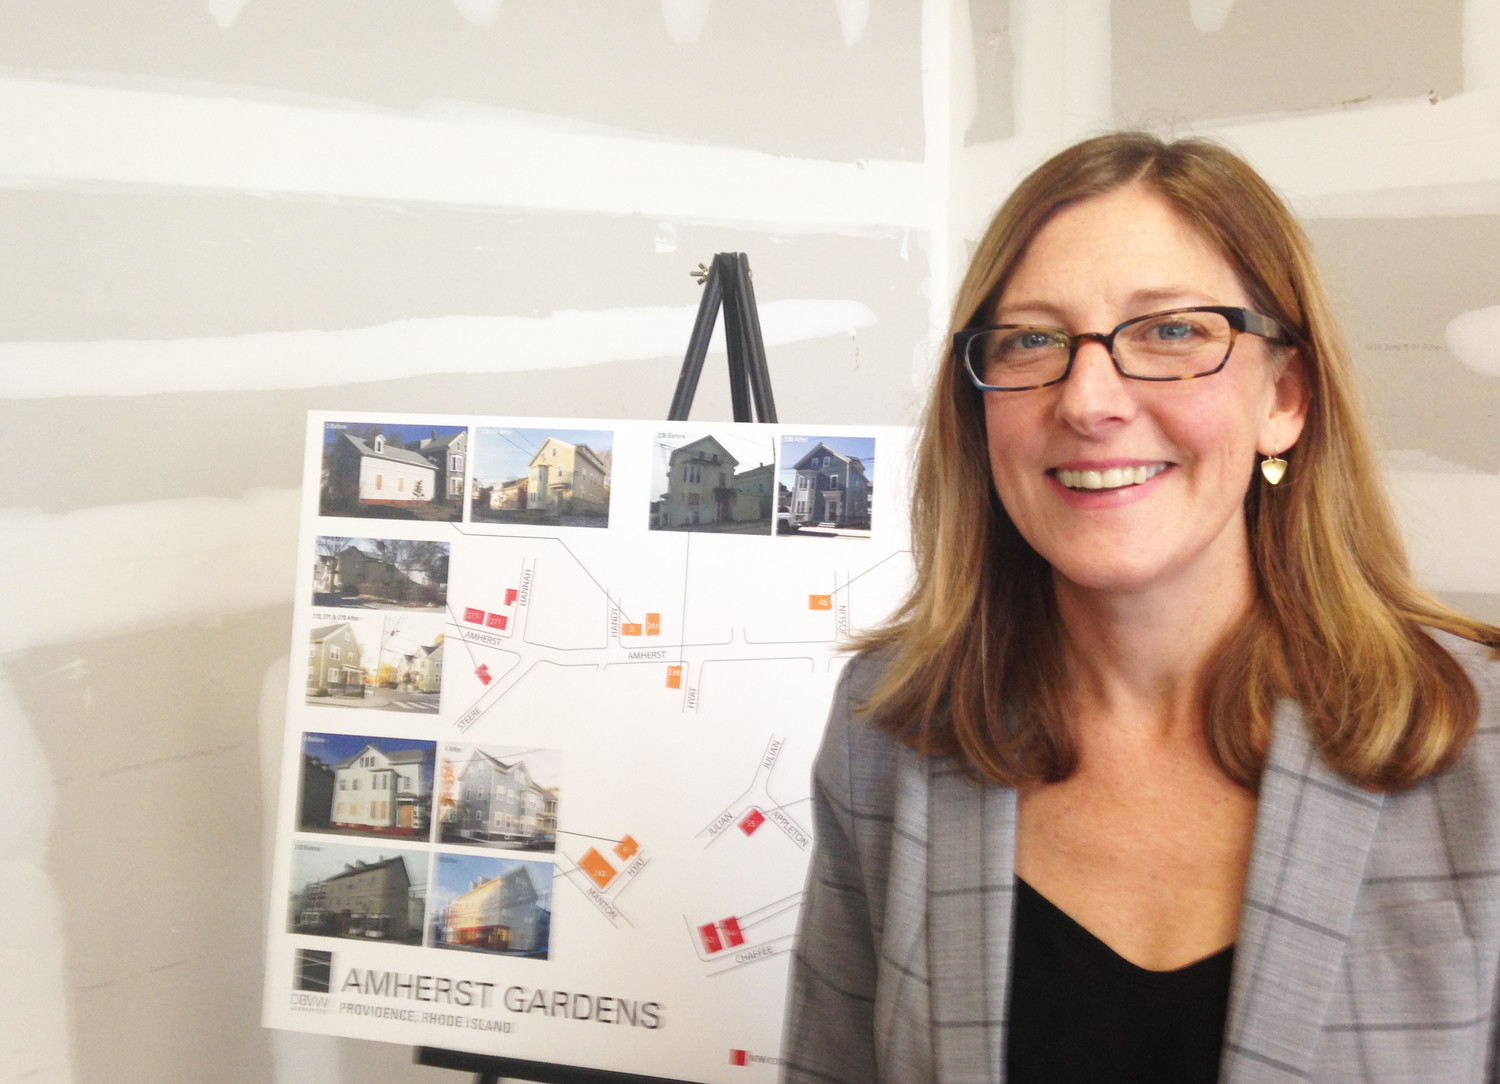 Jennifer Hawkins, the executive director of ONE Neighborhood Builders, at a recent event celebrating the completion of the Amherst Gardens project.